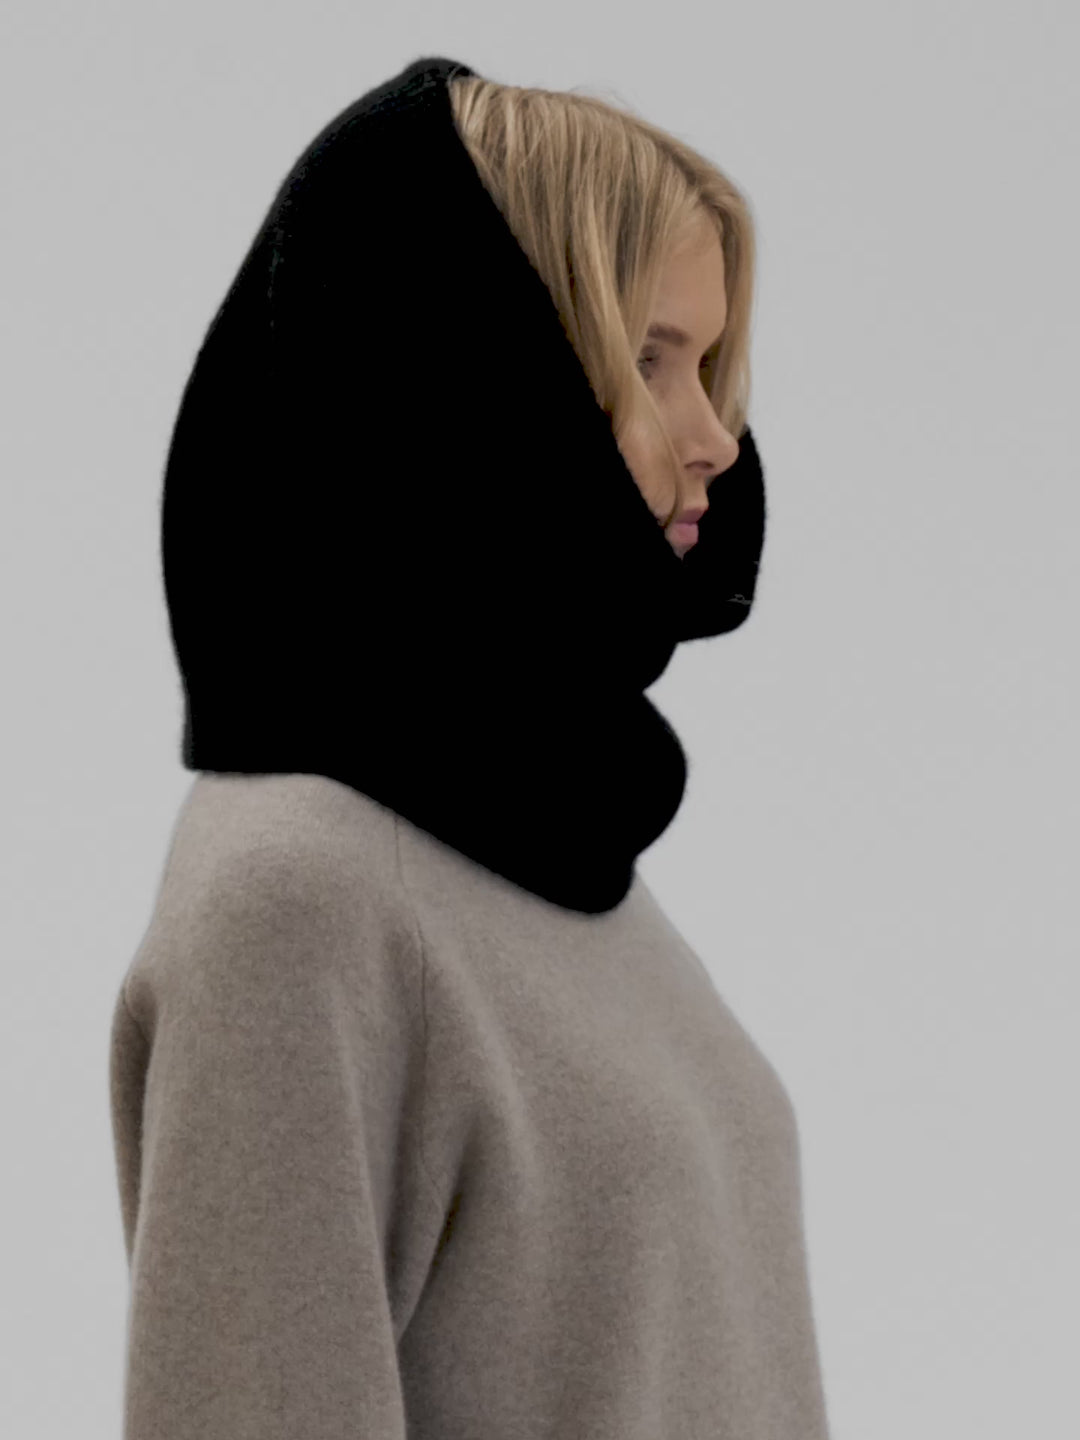 Rib knitted cashmere snood / scarf "Erika" in 100% pure cashmere. Scandinavian design by Kashmina. Color: Black.